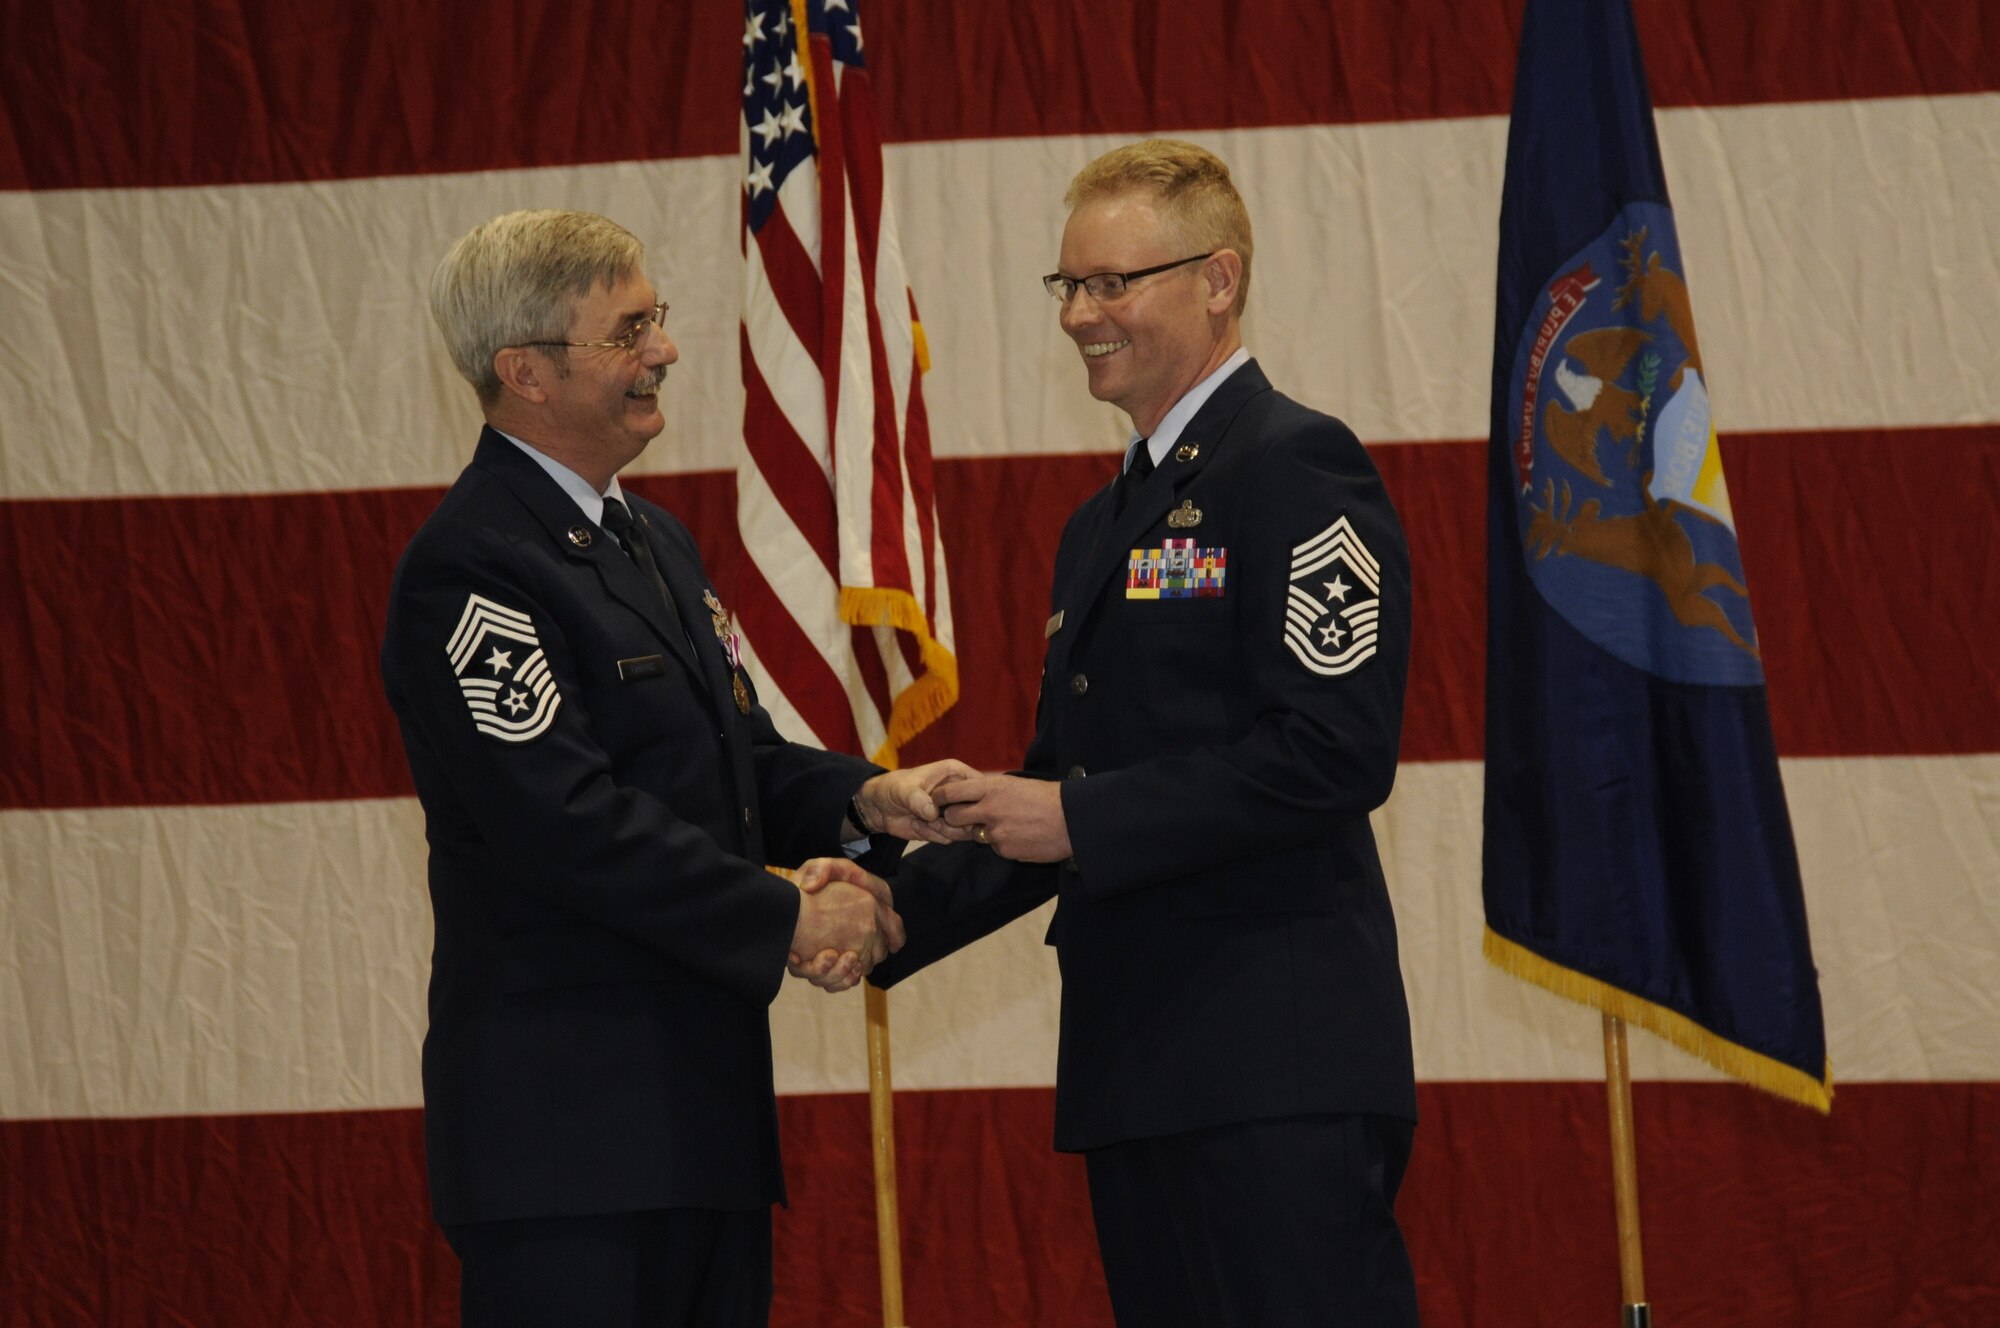 Chief Master Sgt. Keith Edwards and Chief Master Sgt. Robert Dobson exchange a handshake during the ceremony in which Edwards relinquished his position as the command chief master sergeant of the 127th Wing of the Michigan Air National Guard, a role that is now held by Dobson. Edwards, who also retired in the ceremony, passed on his cell phone to Dobson during the ceremony, symbolizing the wing command chief’s responsibility to be a key advisor to the wing commander on all matters that pertain to the wing’s enlisted force. (U.S. Air Force photo by TSgt. David Kujawa)(RELEASED)